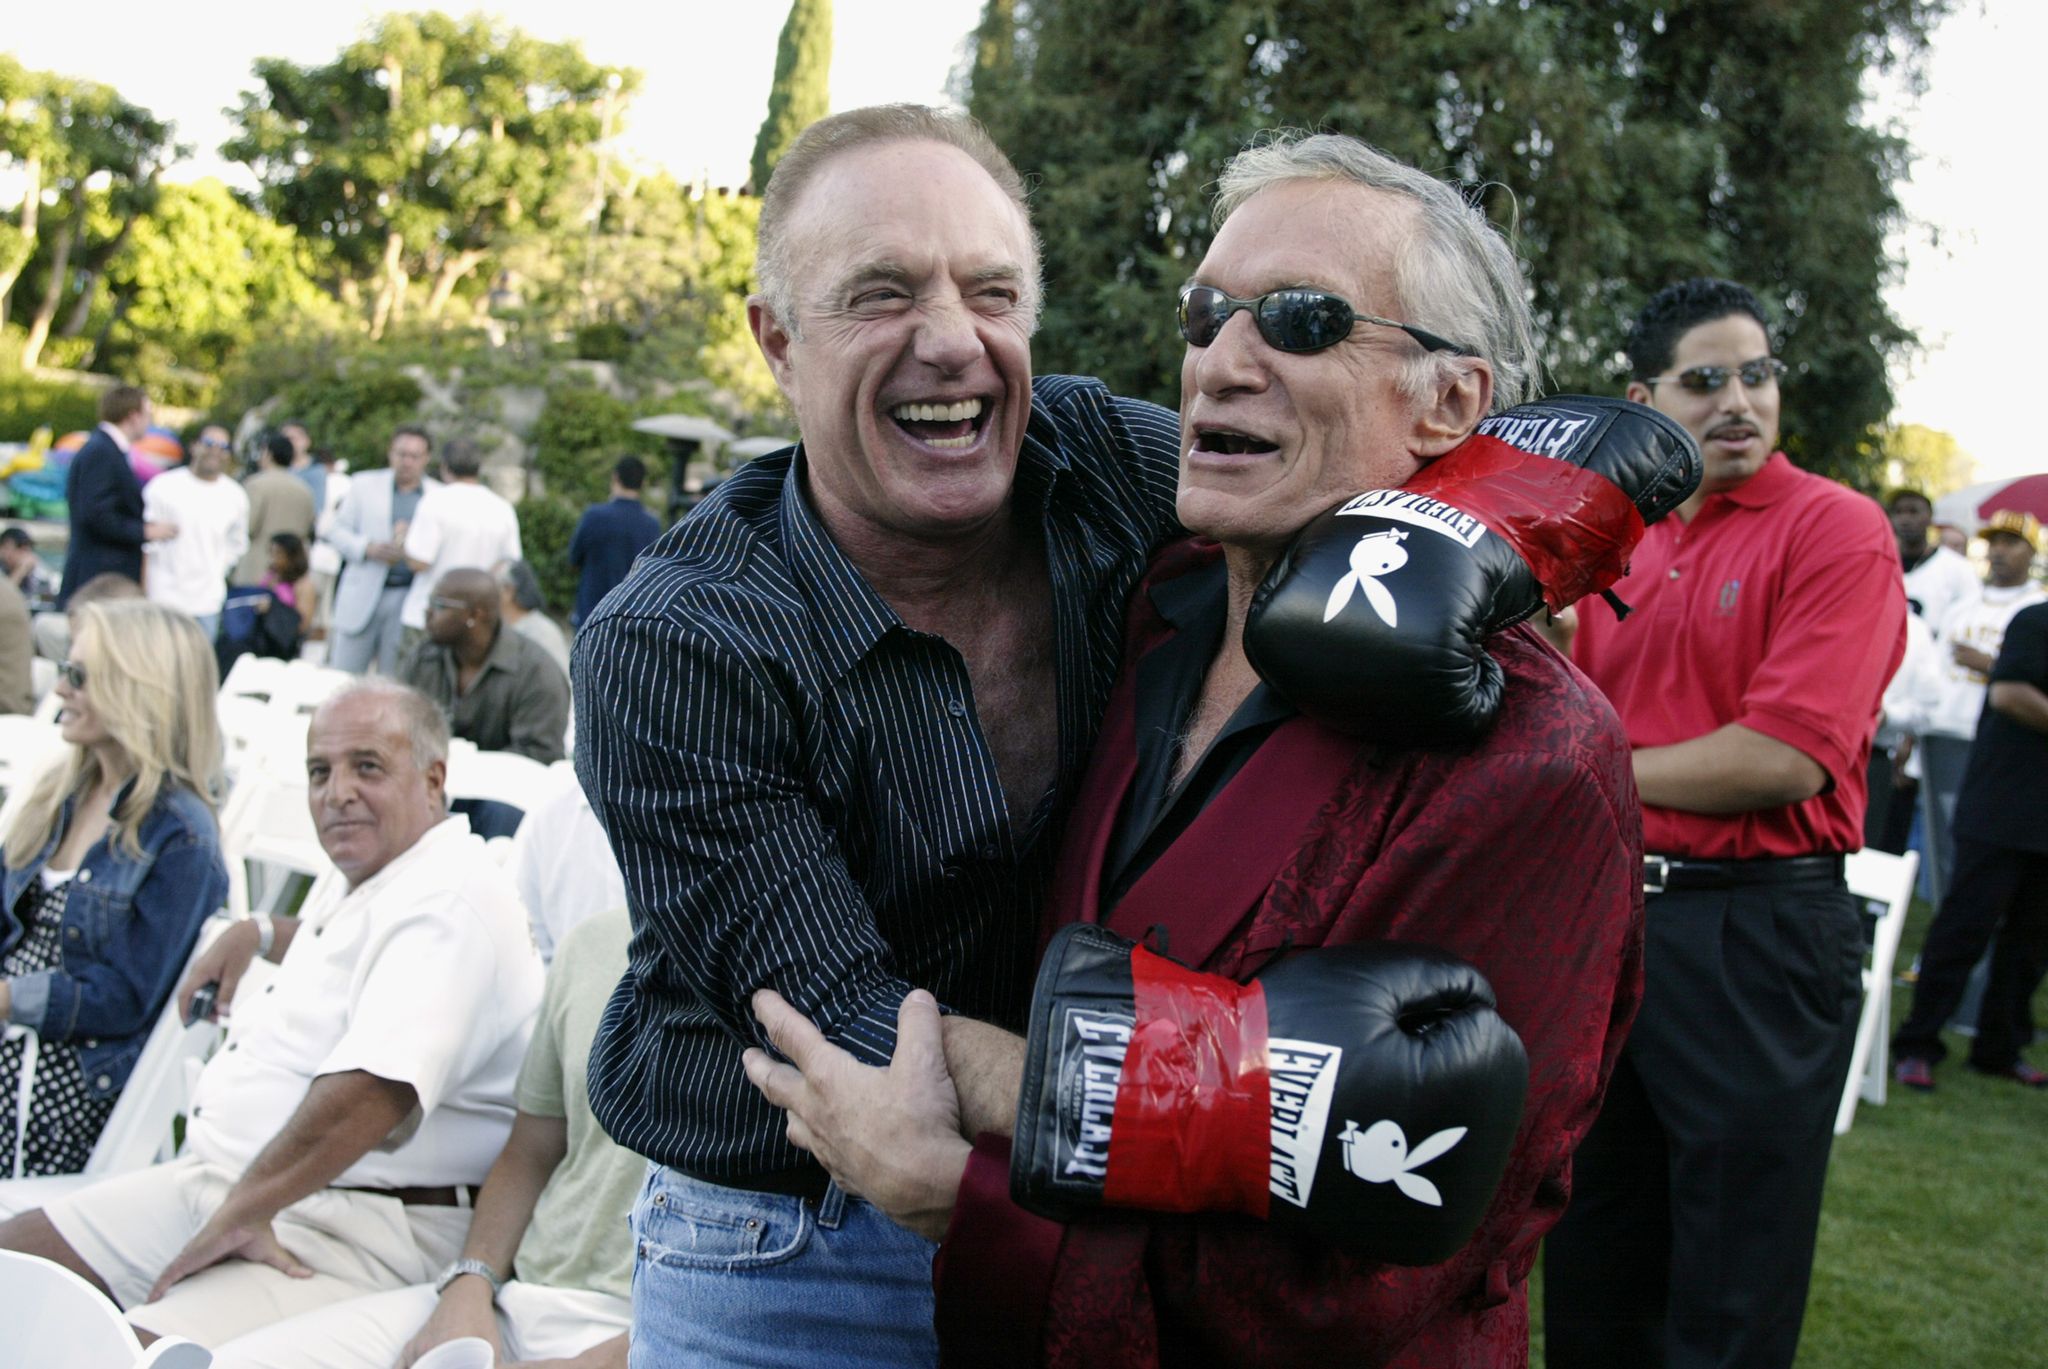 cann and hefner at the playboy mansion fight night